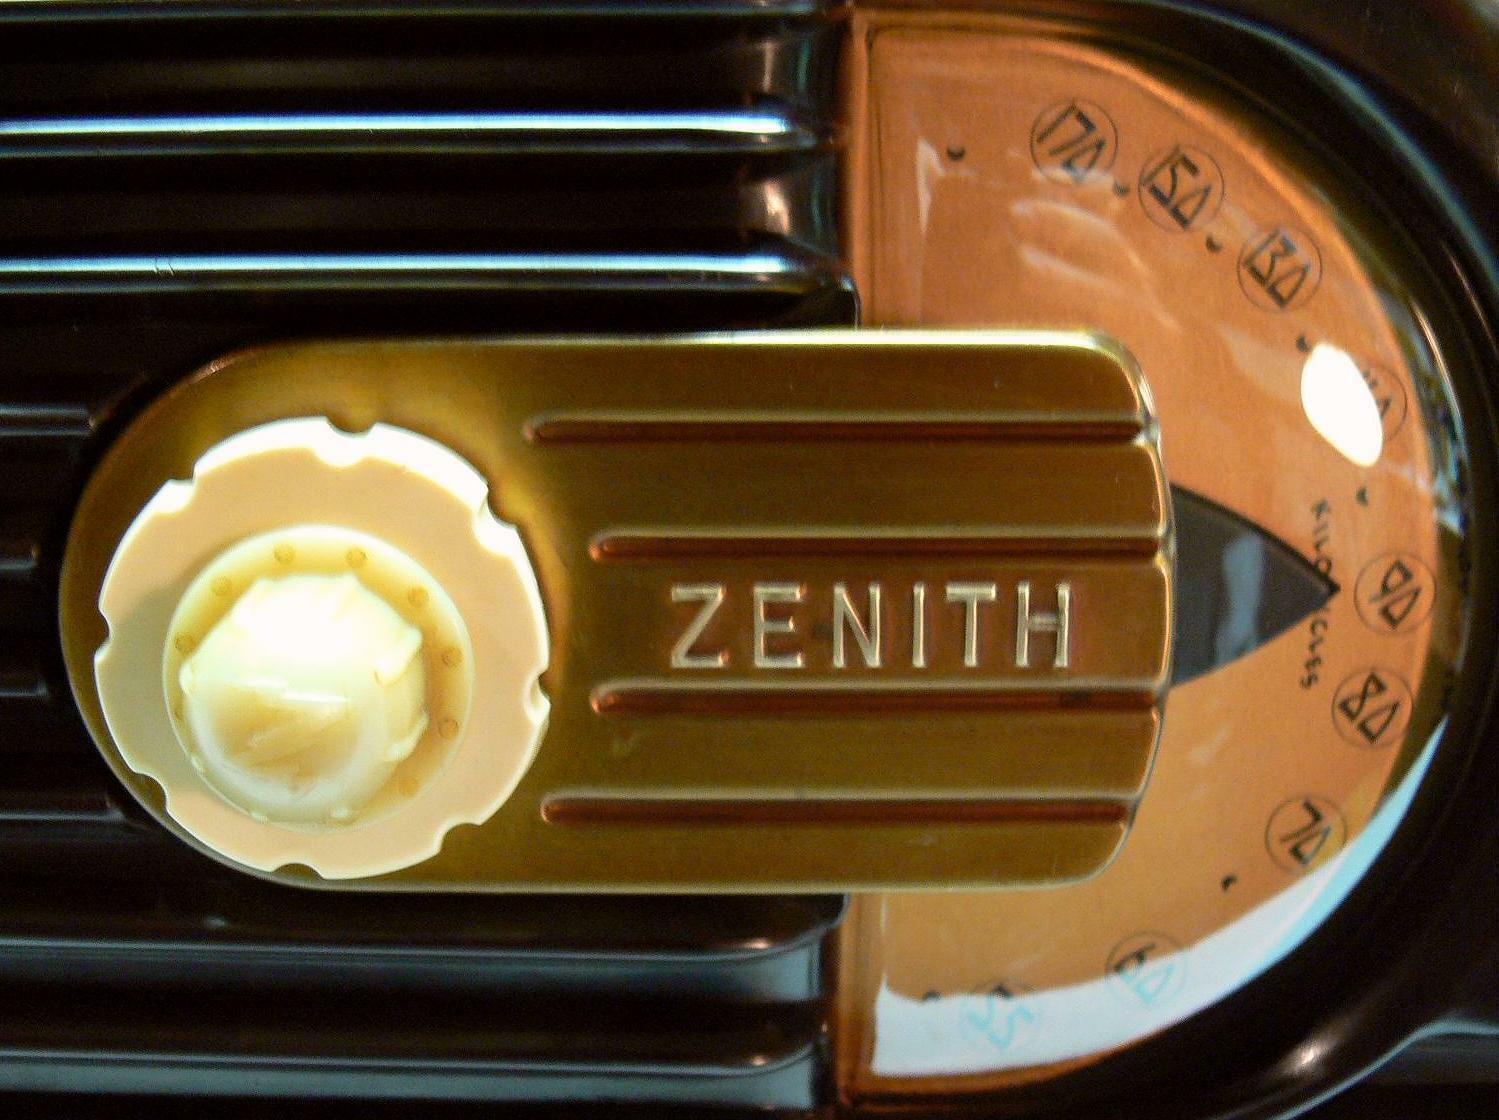 Zenith NEW Radio Dial Lens Cover - MODELS 6D311 - PREMIUM THICKNESS